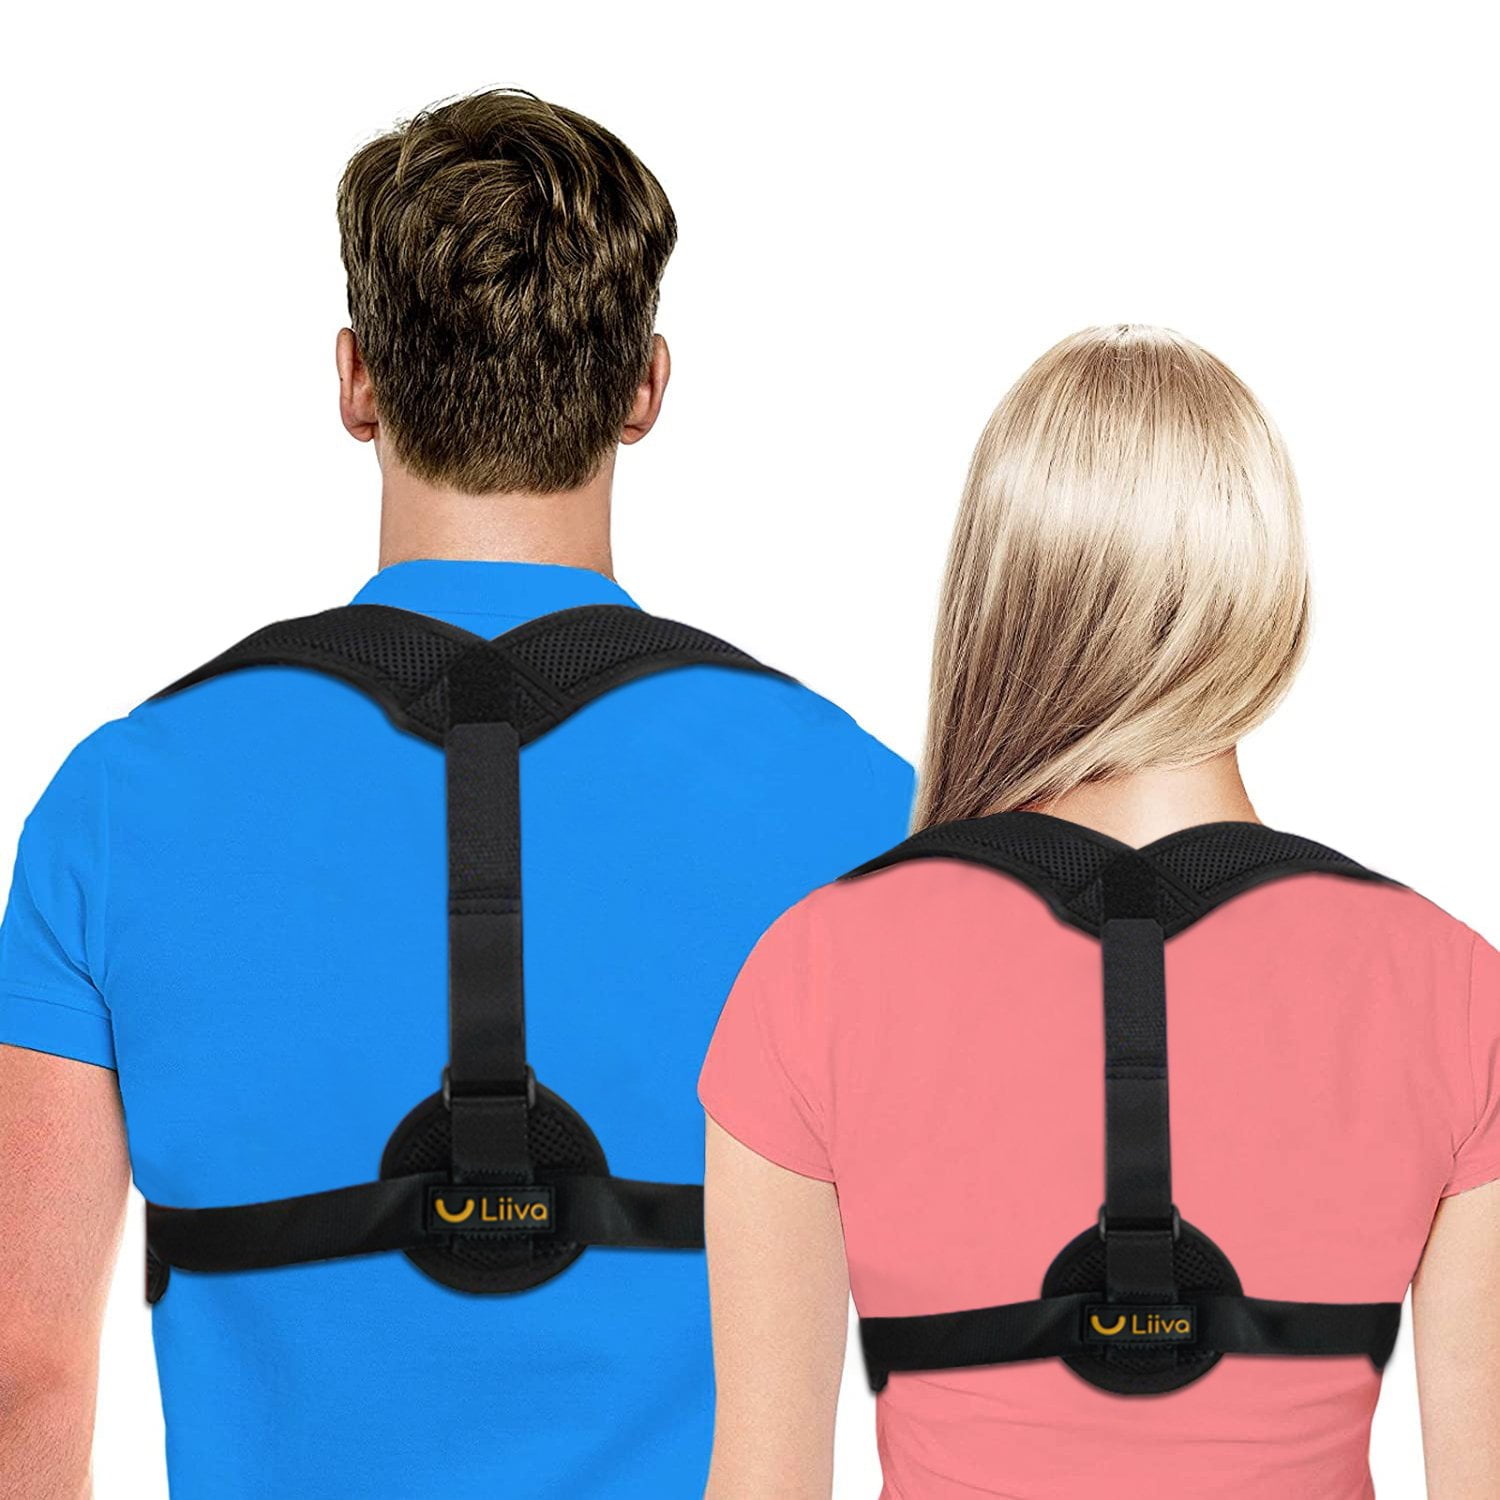 Women Back Braces Posture Corrector, Adjustable Upper Back Brace for  Clavicle Support and Providing Pain Relief from Neck, Back Brace and Posture  Corrector for Women and Men (Small/Medium 27-37)